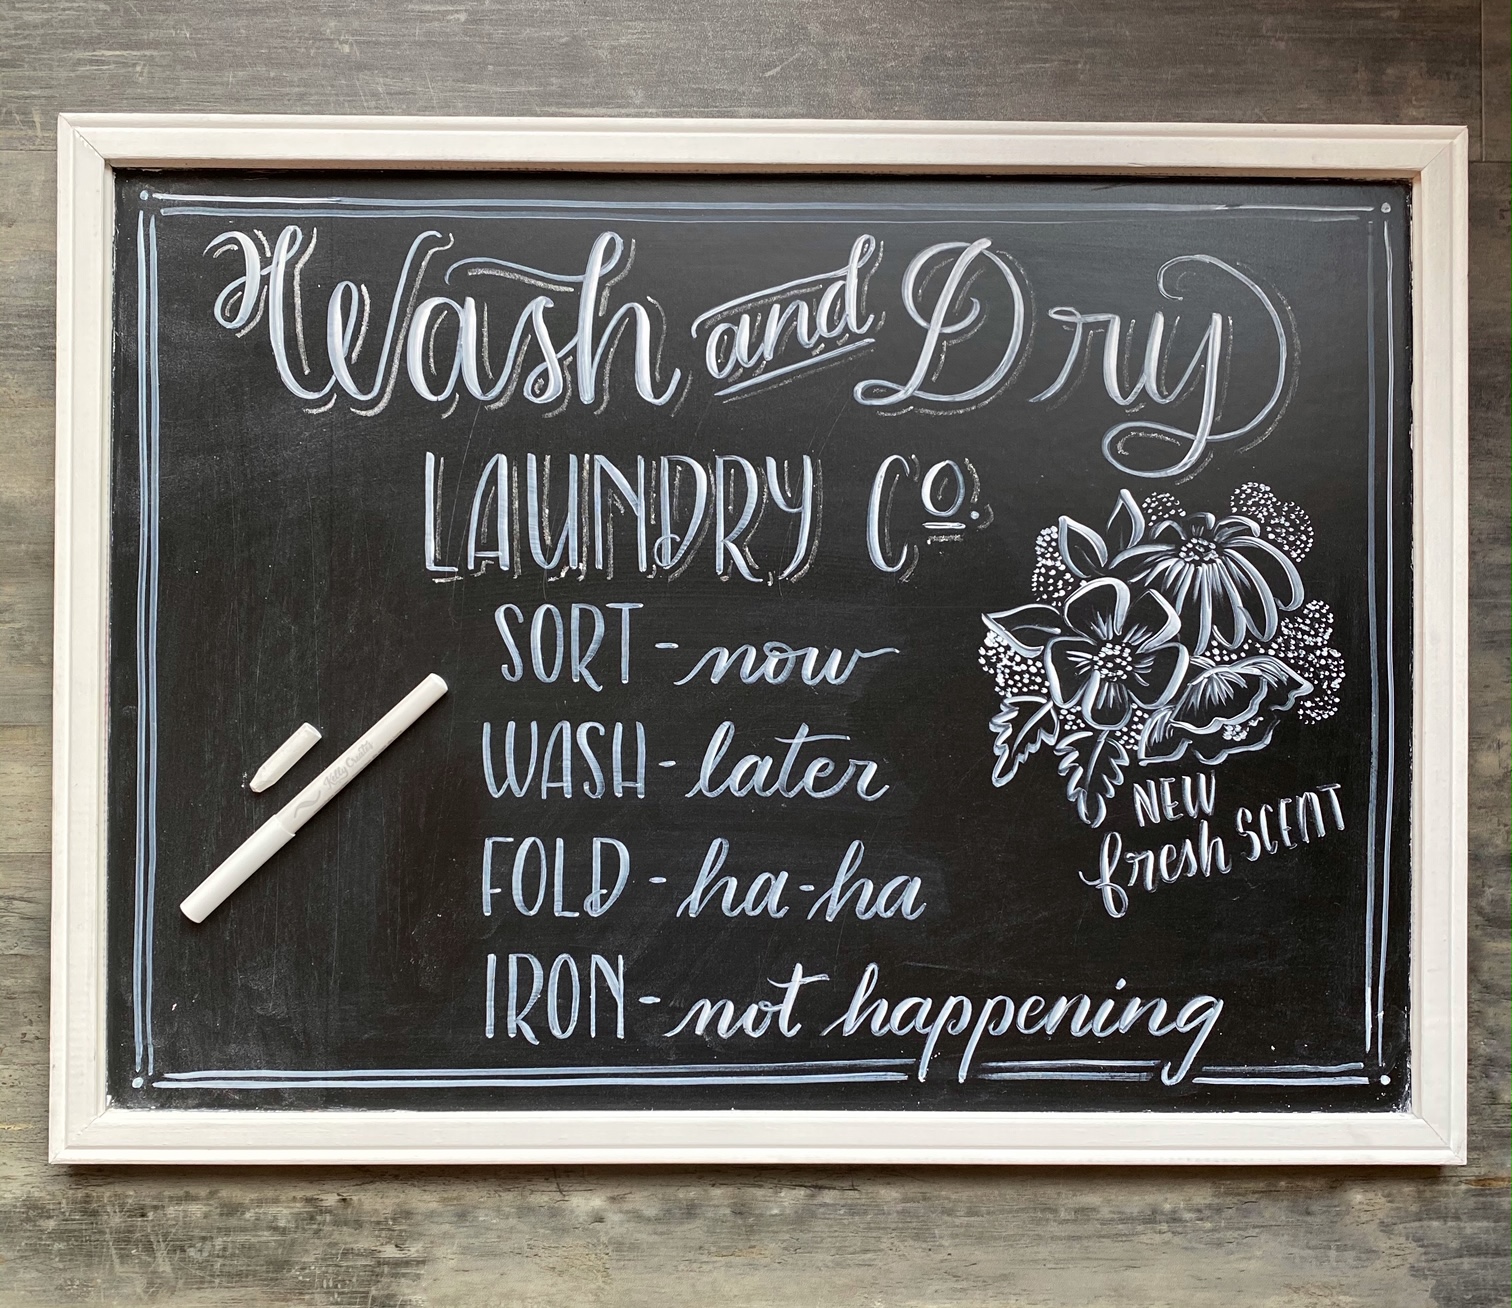 How to Make a DIY Chalkboard on Any Surface — Raleigh Calligraphy